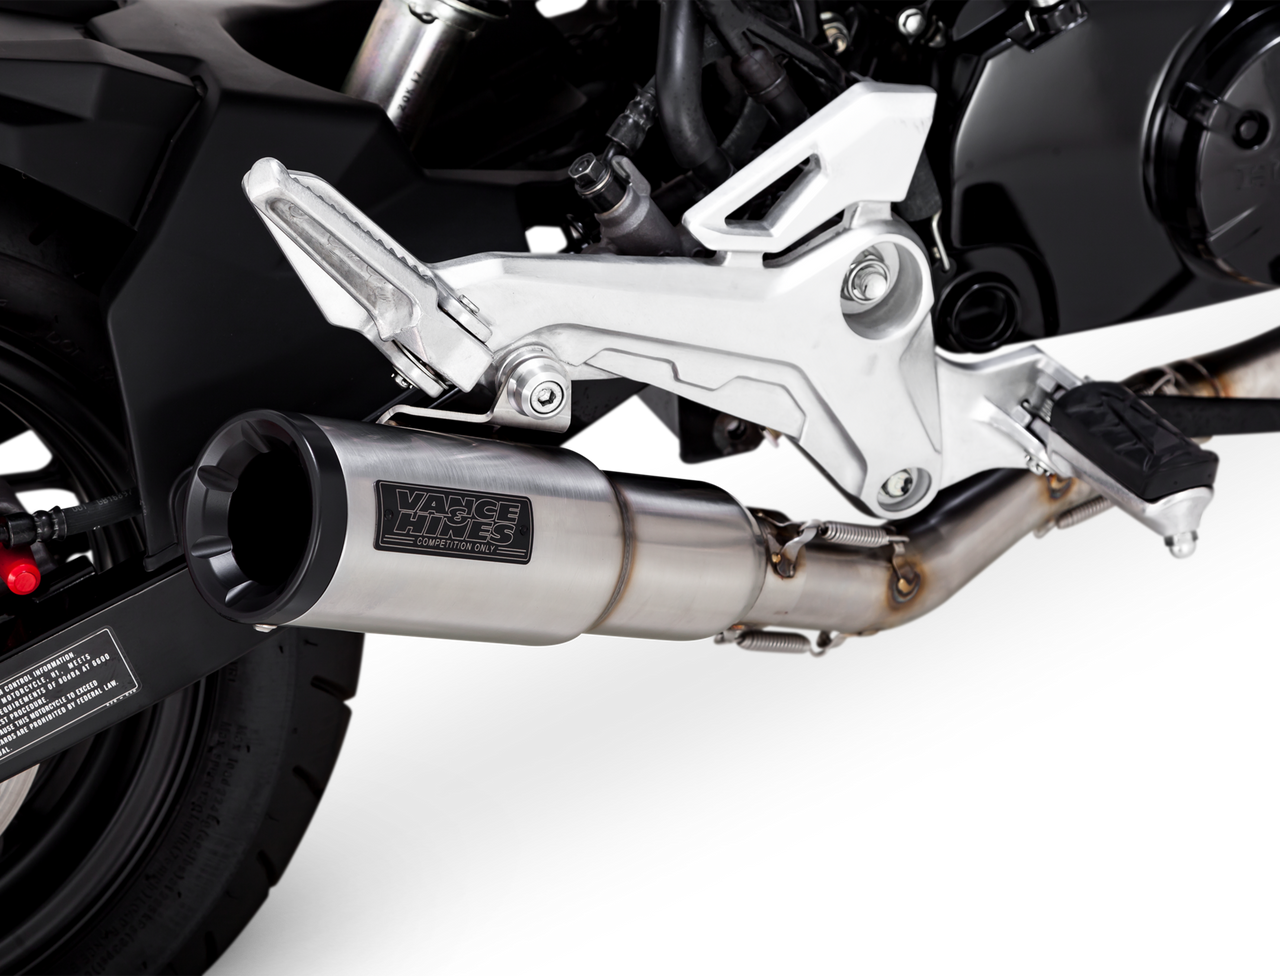 Vance & Hines Hi-Output Slip-On Exhaust - Grom